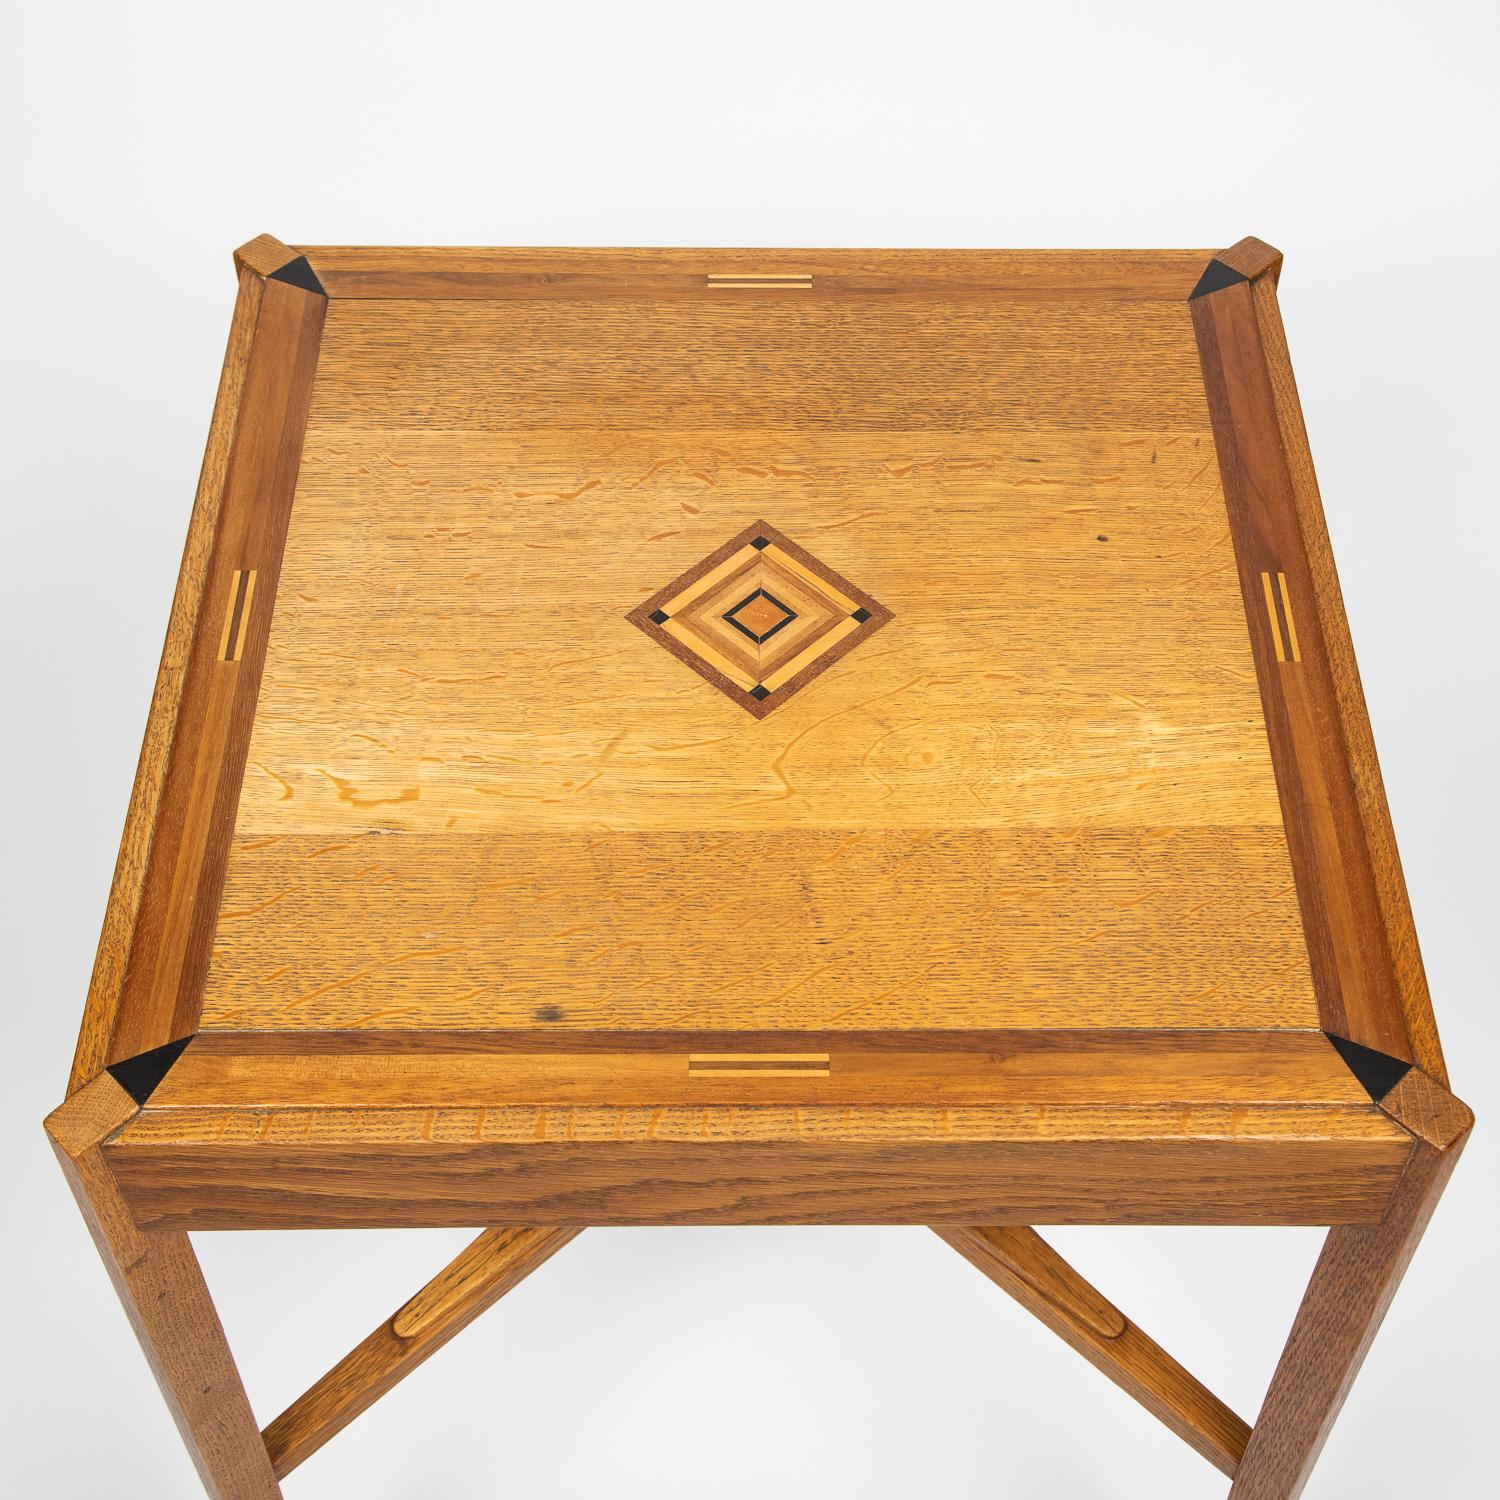 An early 20th century oak side table, with specimen inlaid geometric central design, English.